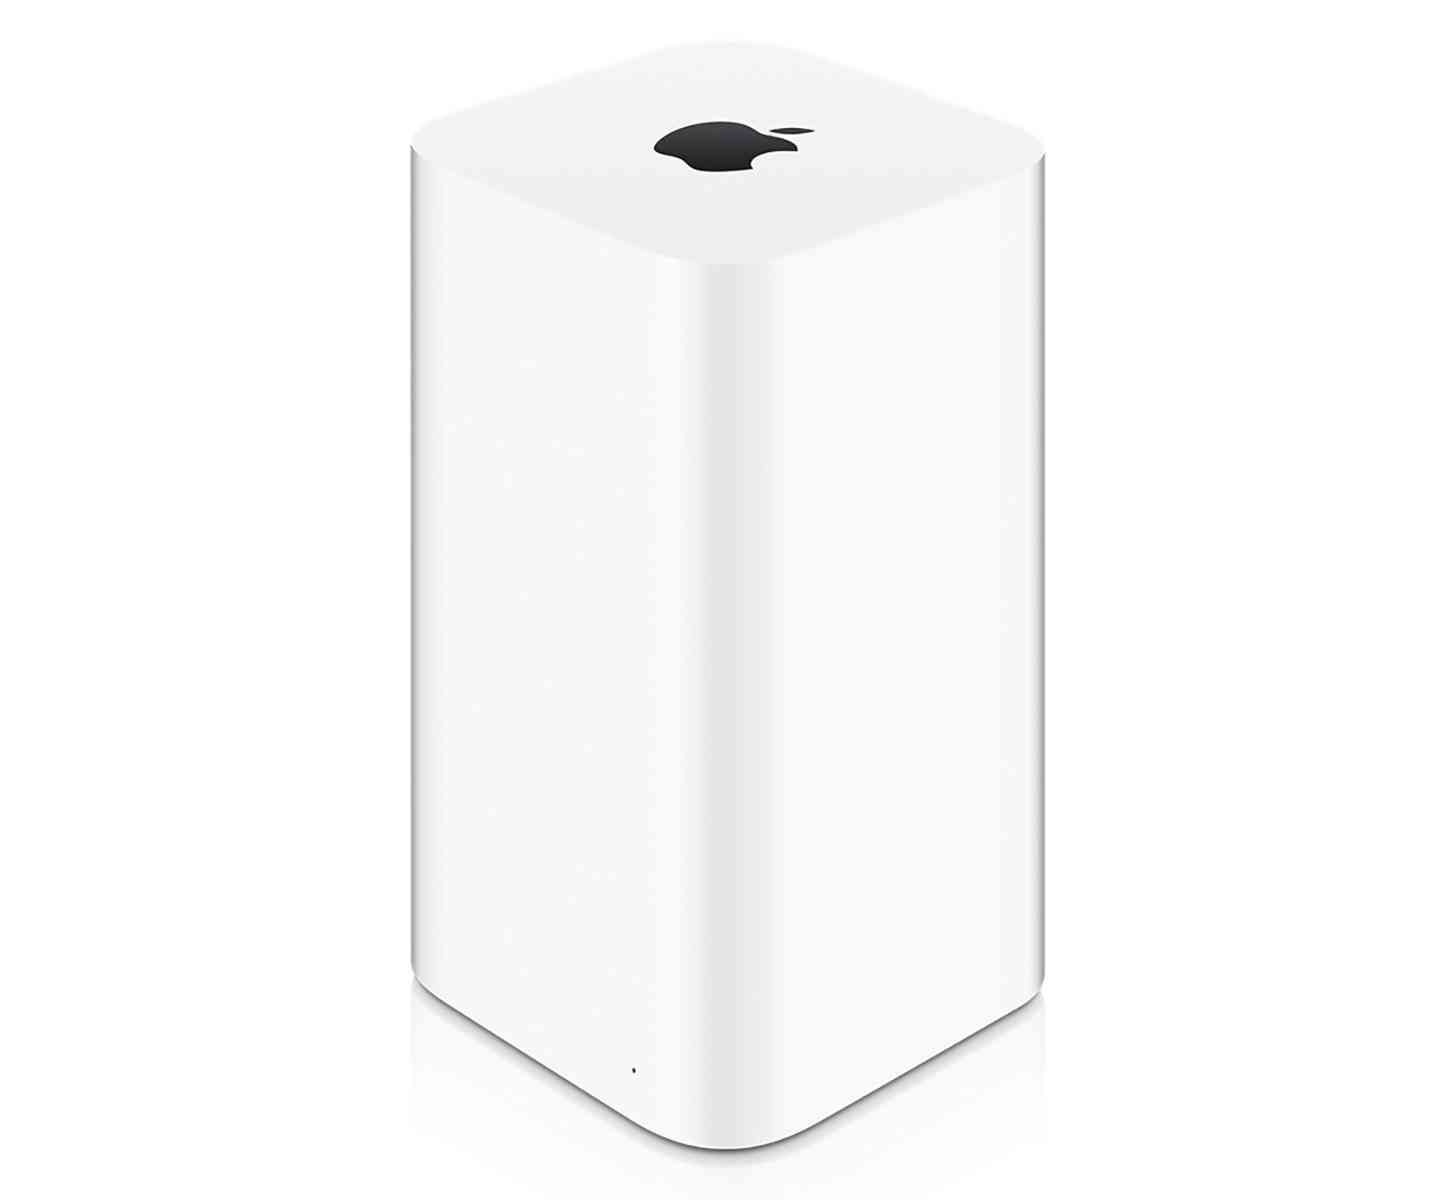 Apple AirPort Extreme Wi-Fi router